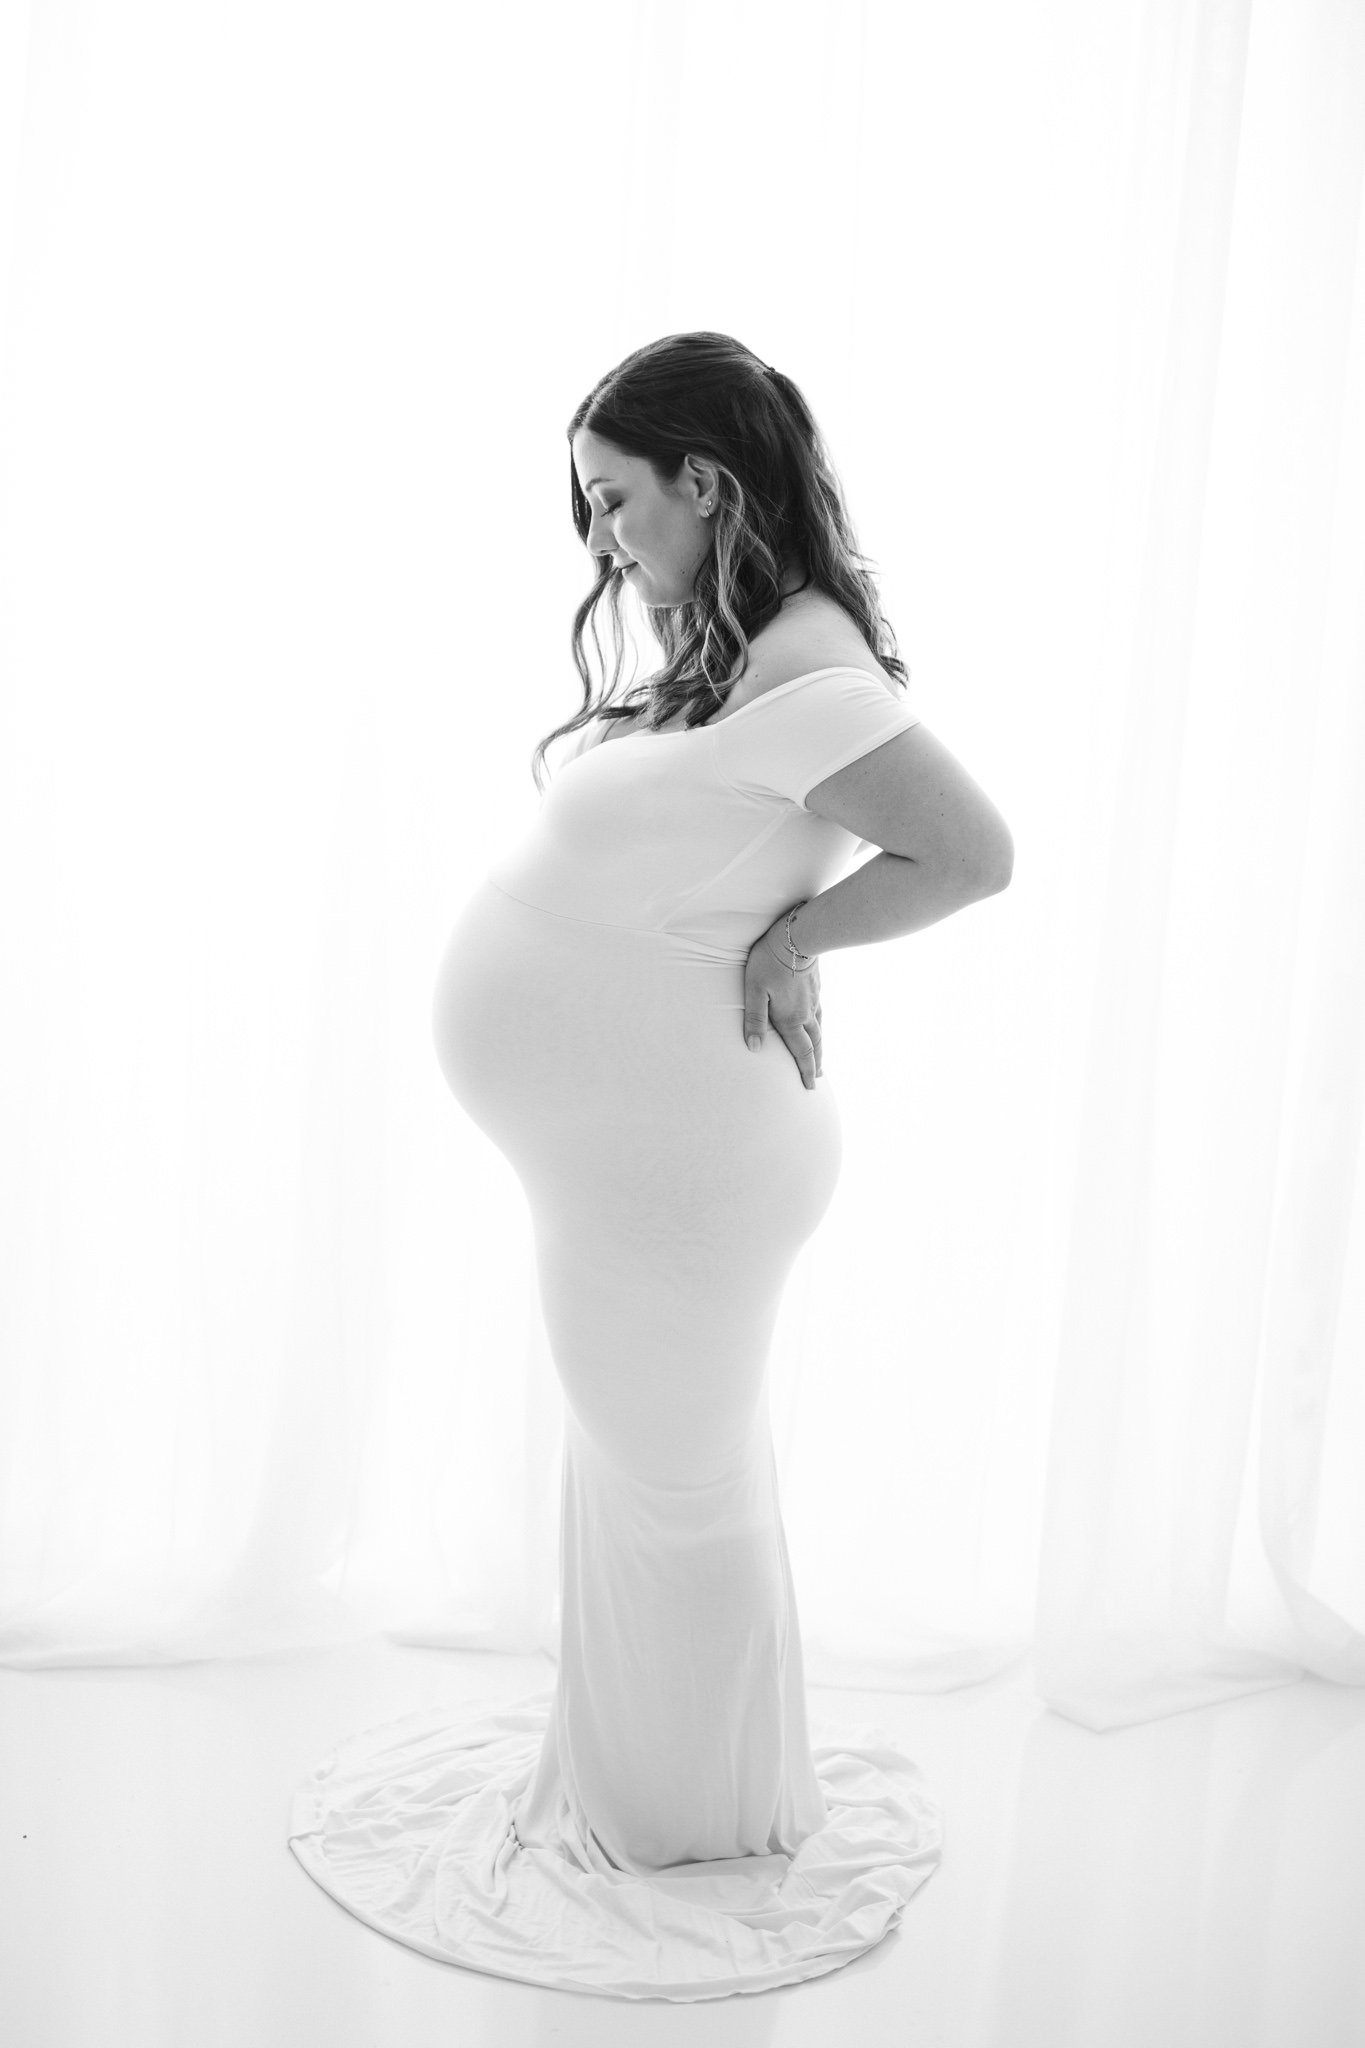  Profile of a Pregnant Mother with bright light behind her by Nicole Hawkins Photography. profile maternity photograph professional maternity portraits #NicoleHawkinsPhotography #NicoleHawkinsMaternity #Babyontheway #studiomaternityNJ #whitestudiomat